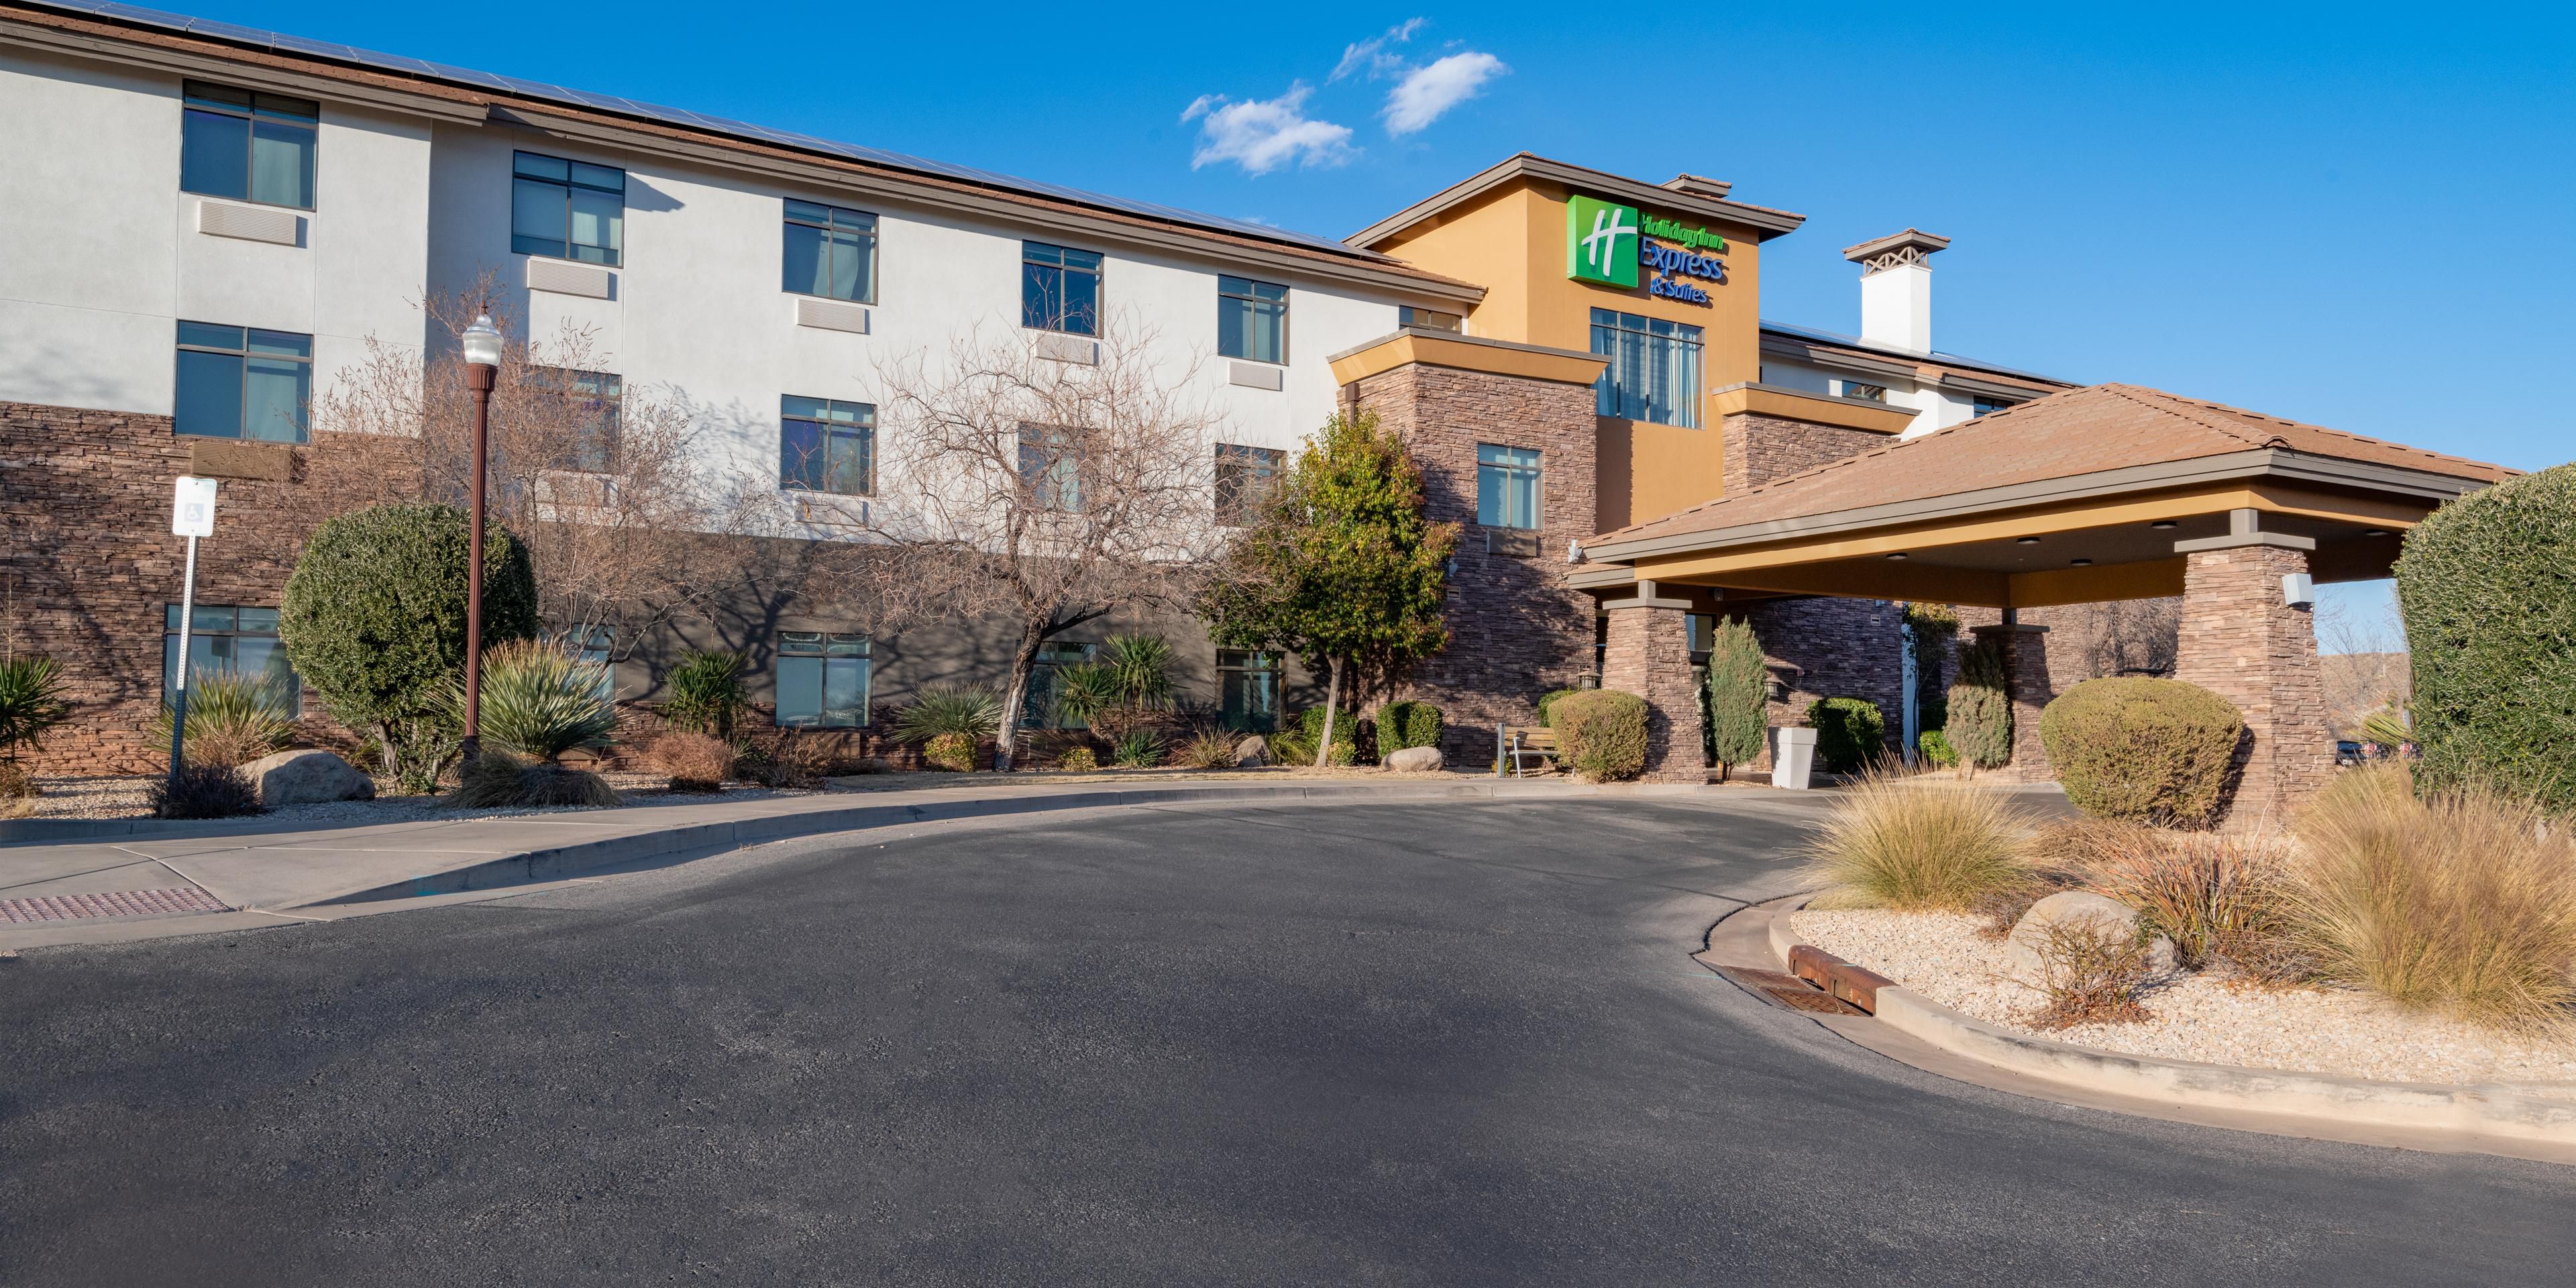 Are are approximately 11 miles from Dixie Convention Center on South Convention Center Drive in St. George.